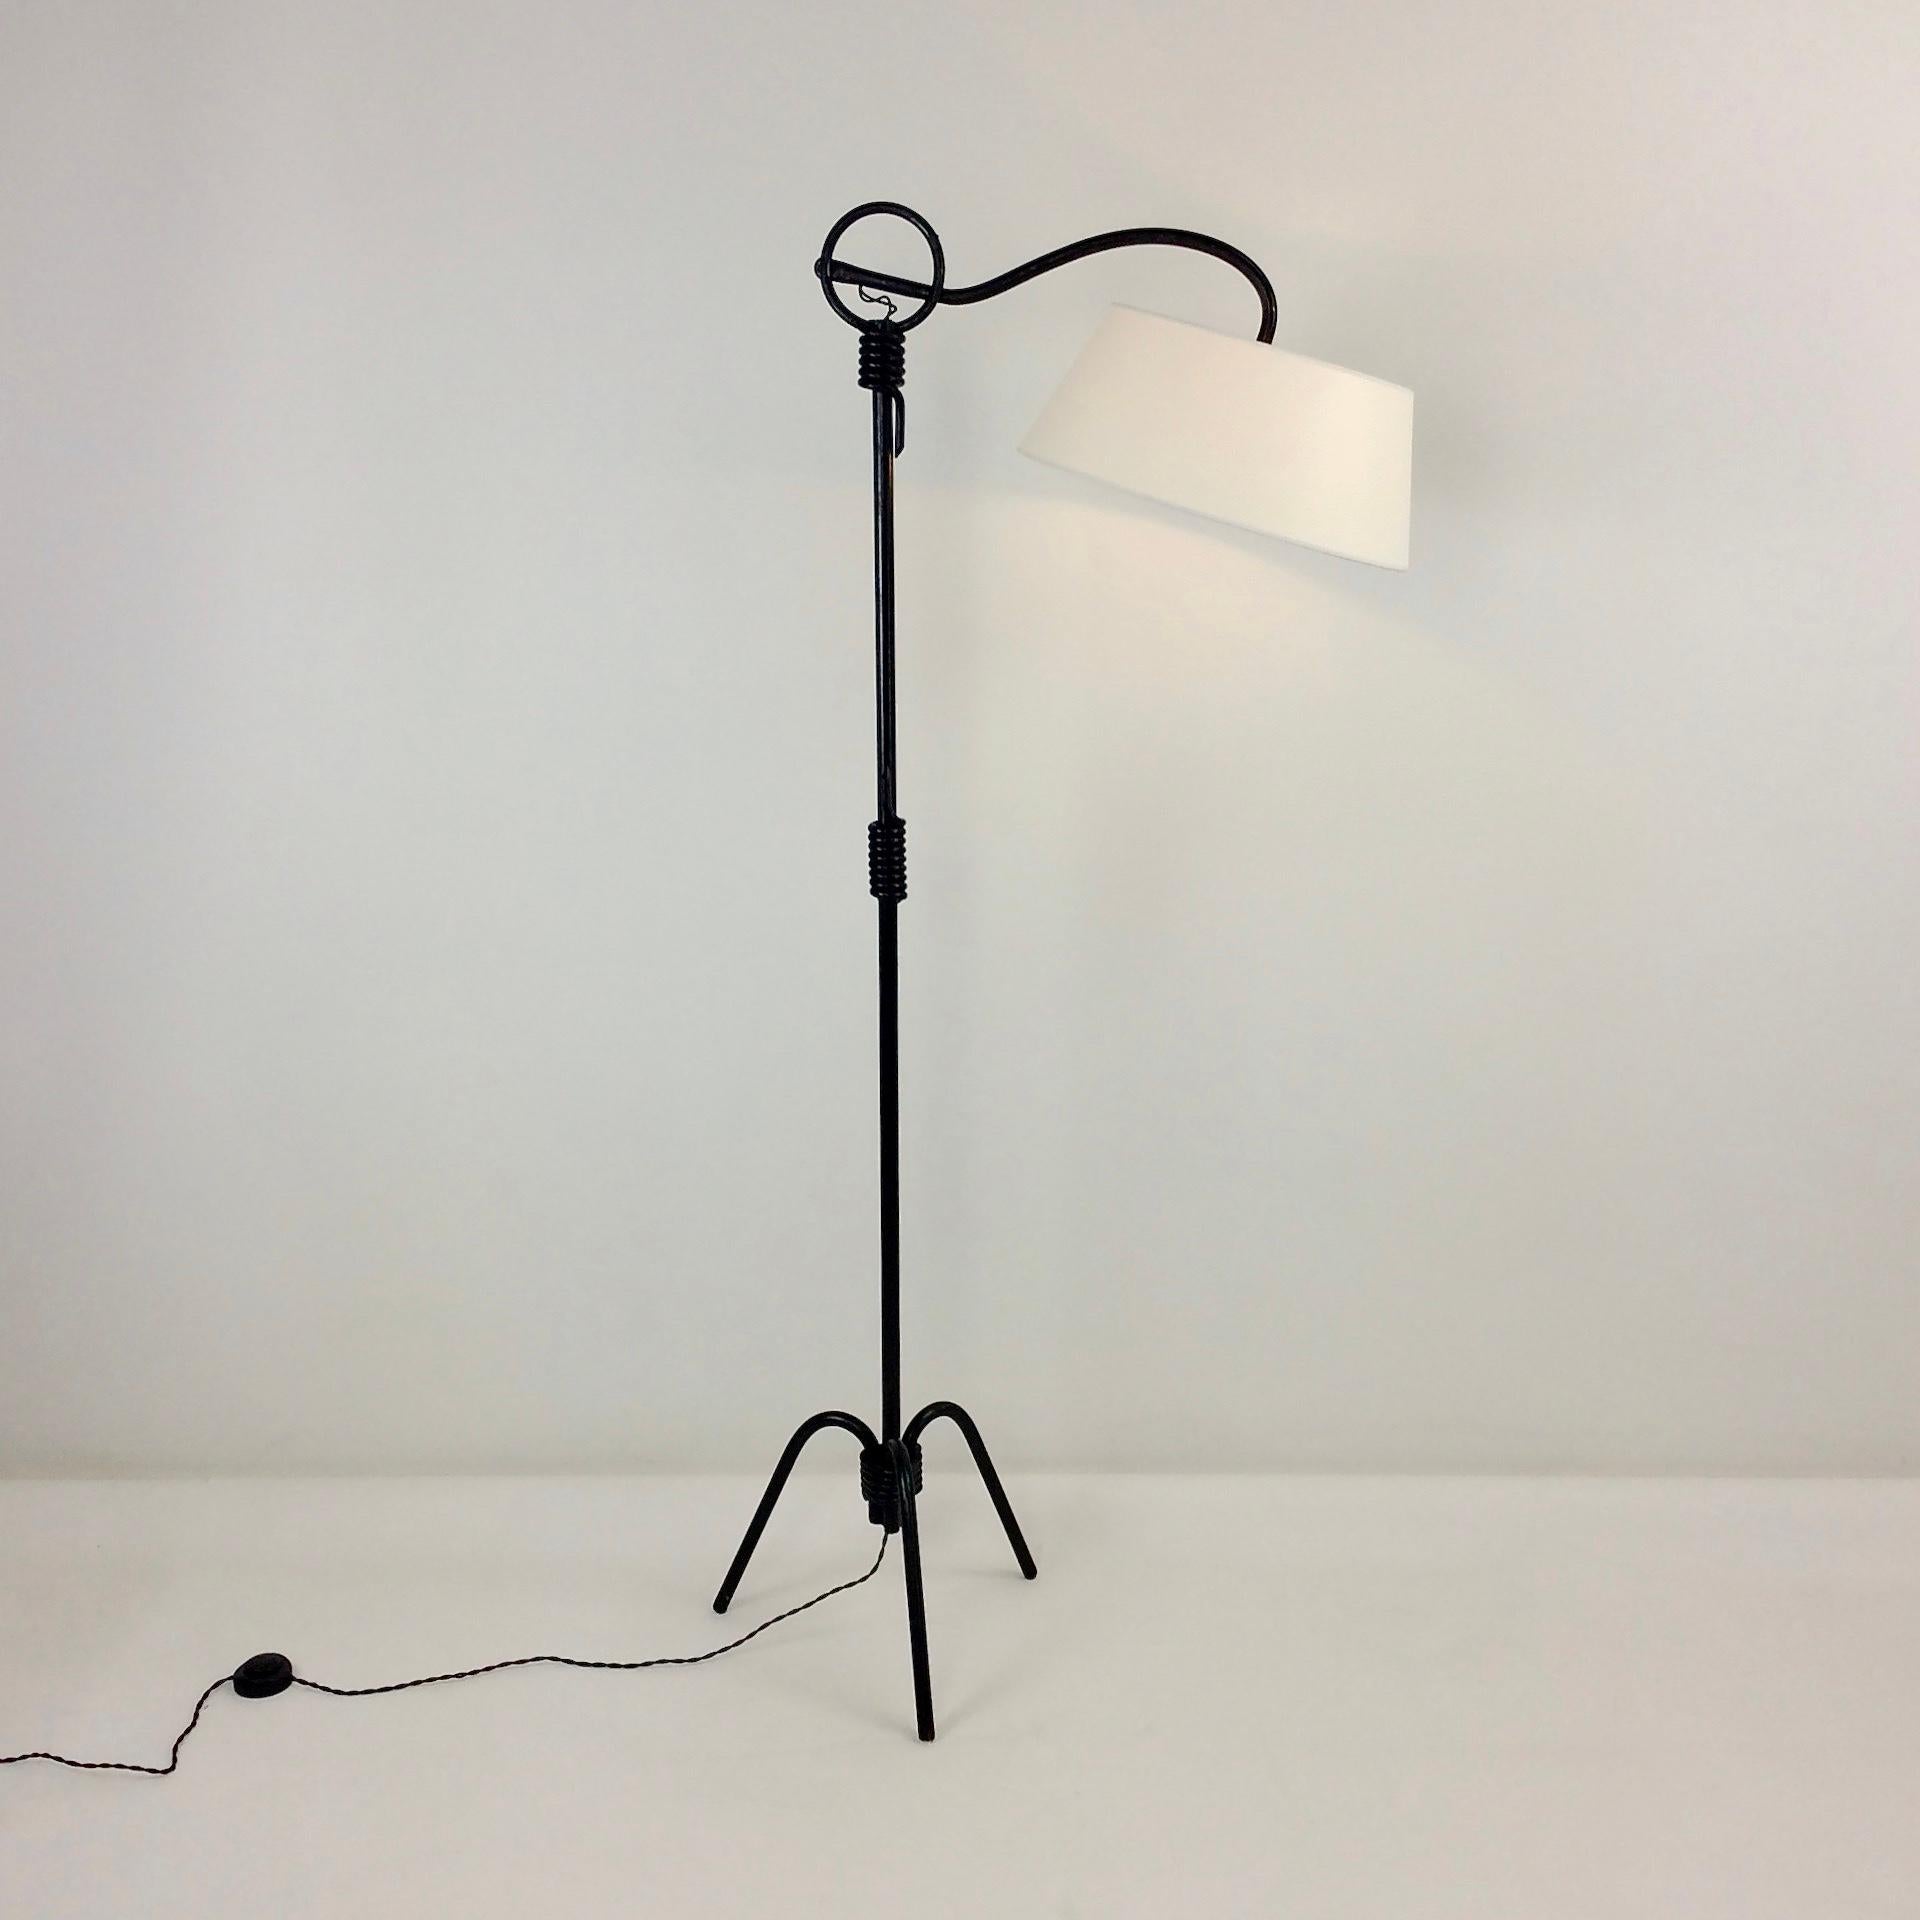 French Mid-Century Attributed Jacques Adnet Floor Lamp, circa 1950, France.